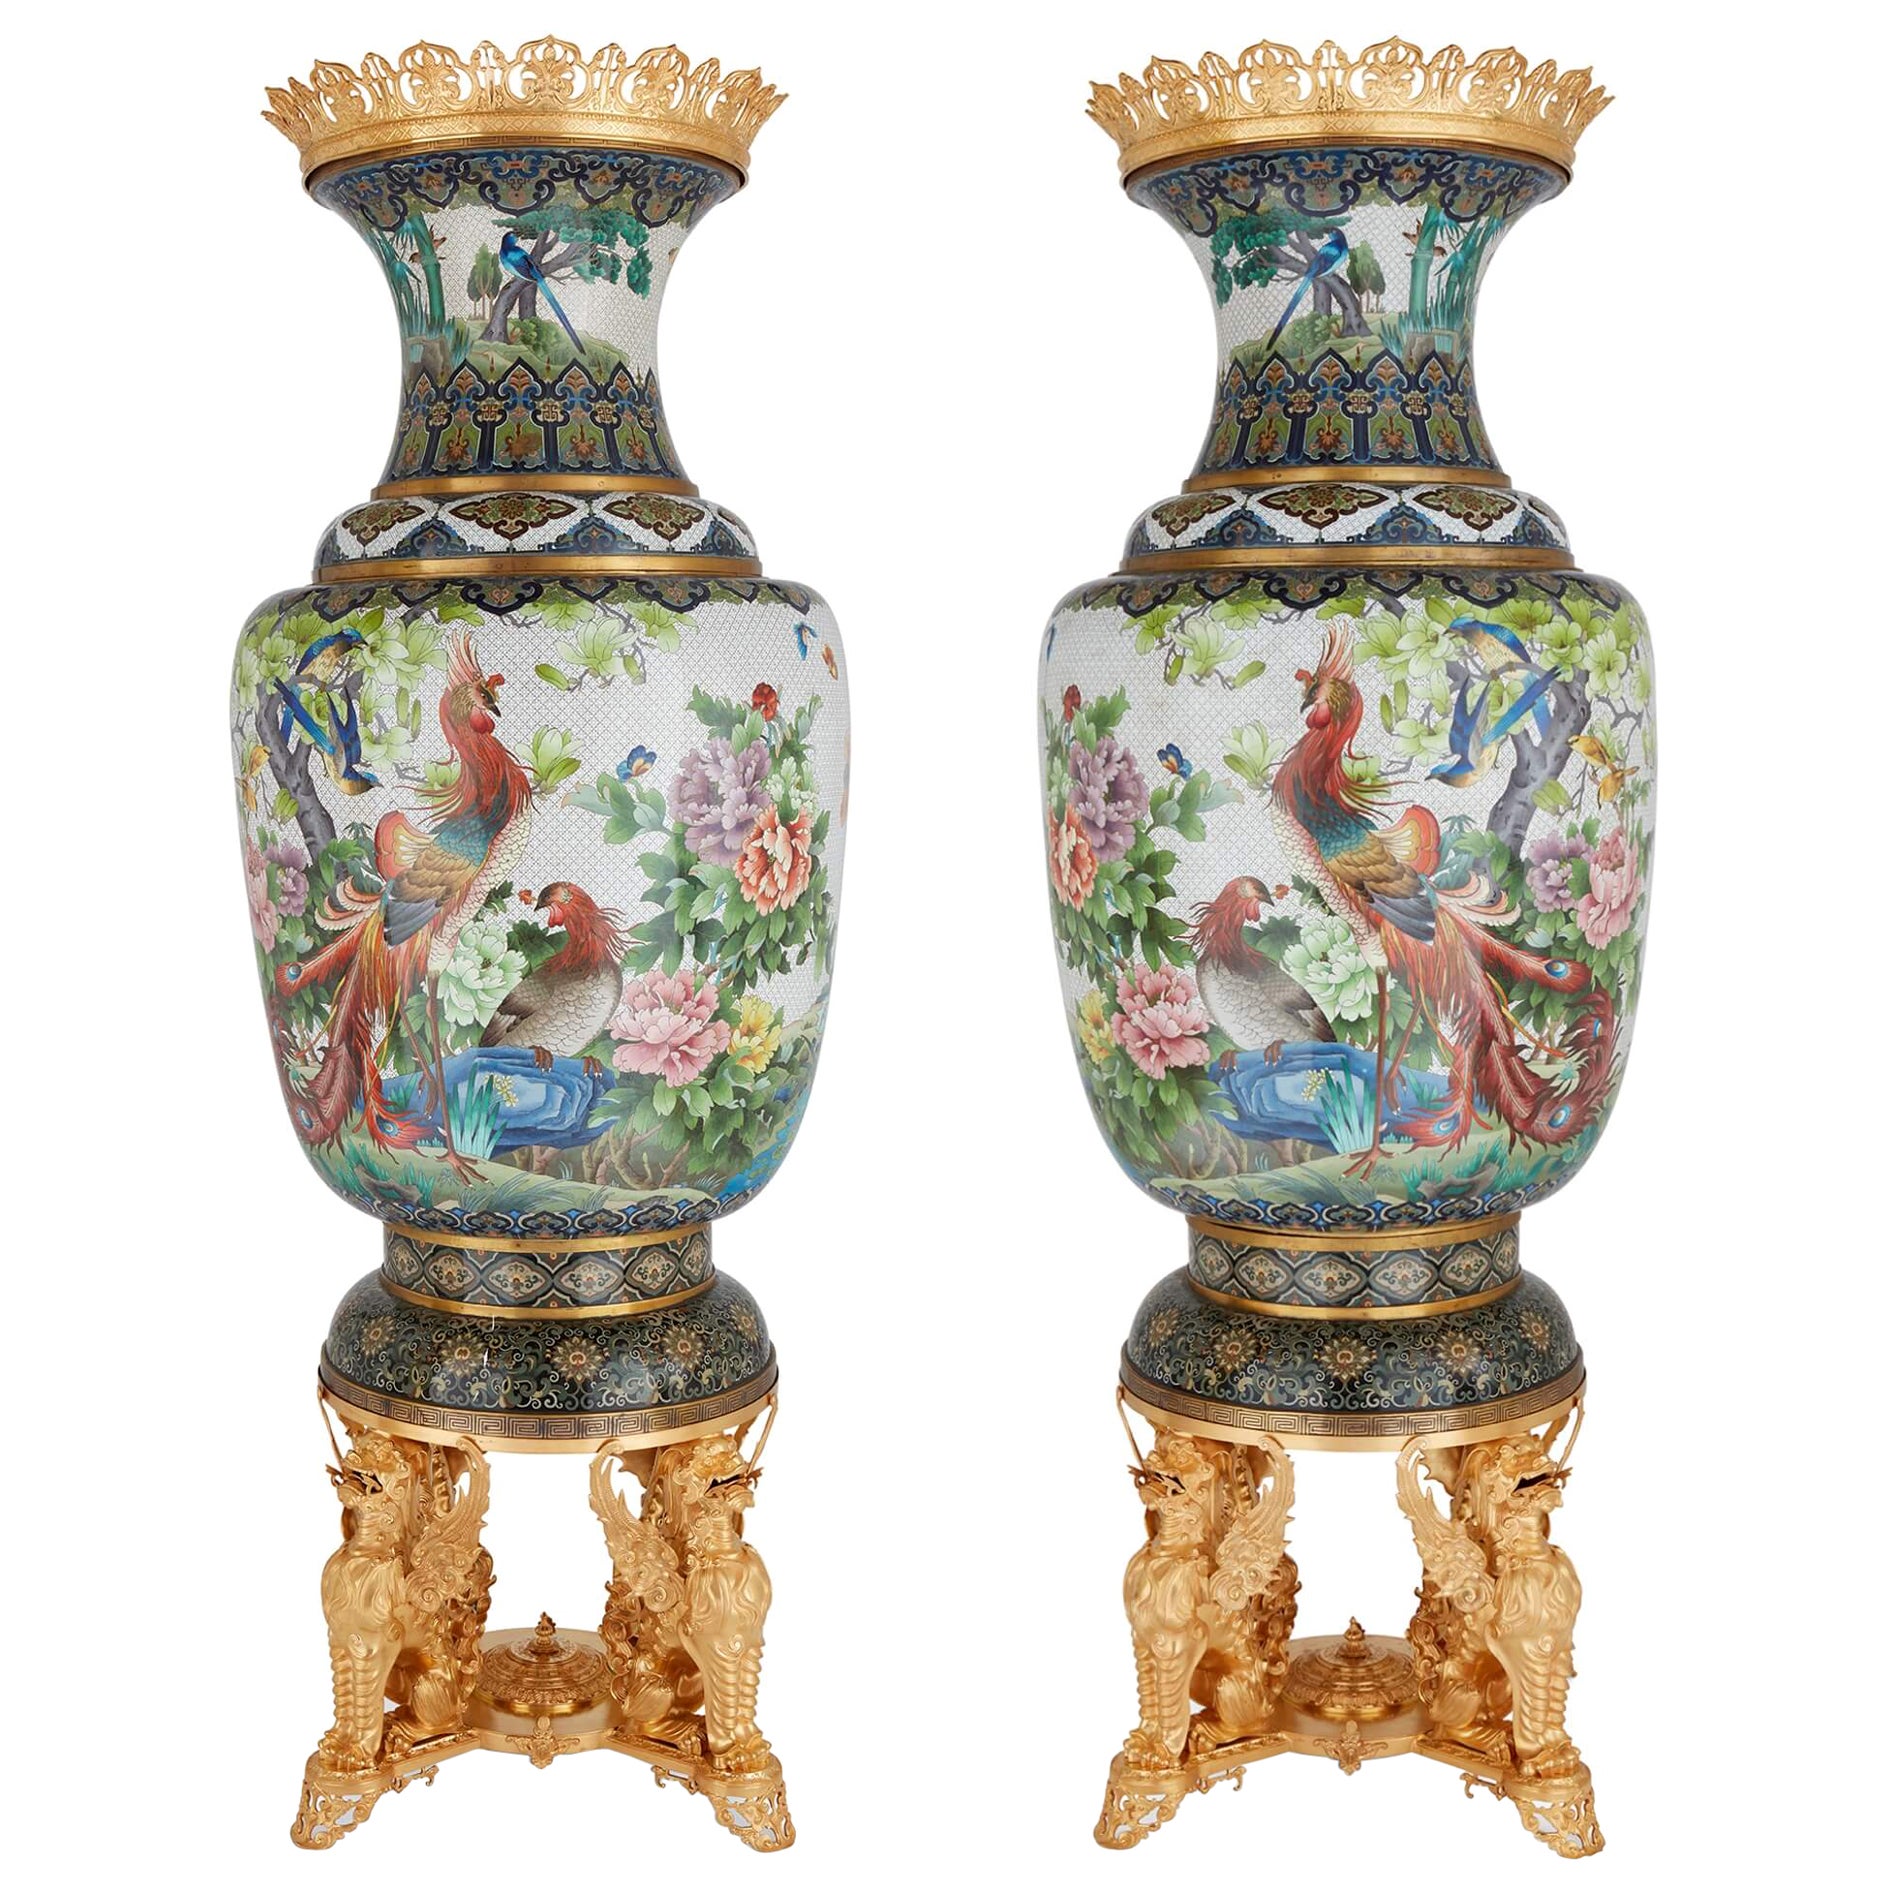 Pair of Very Large Chinese Cloisonné Enamel Vases with French Ormolu Mounts 